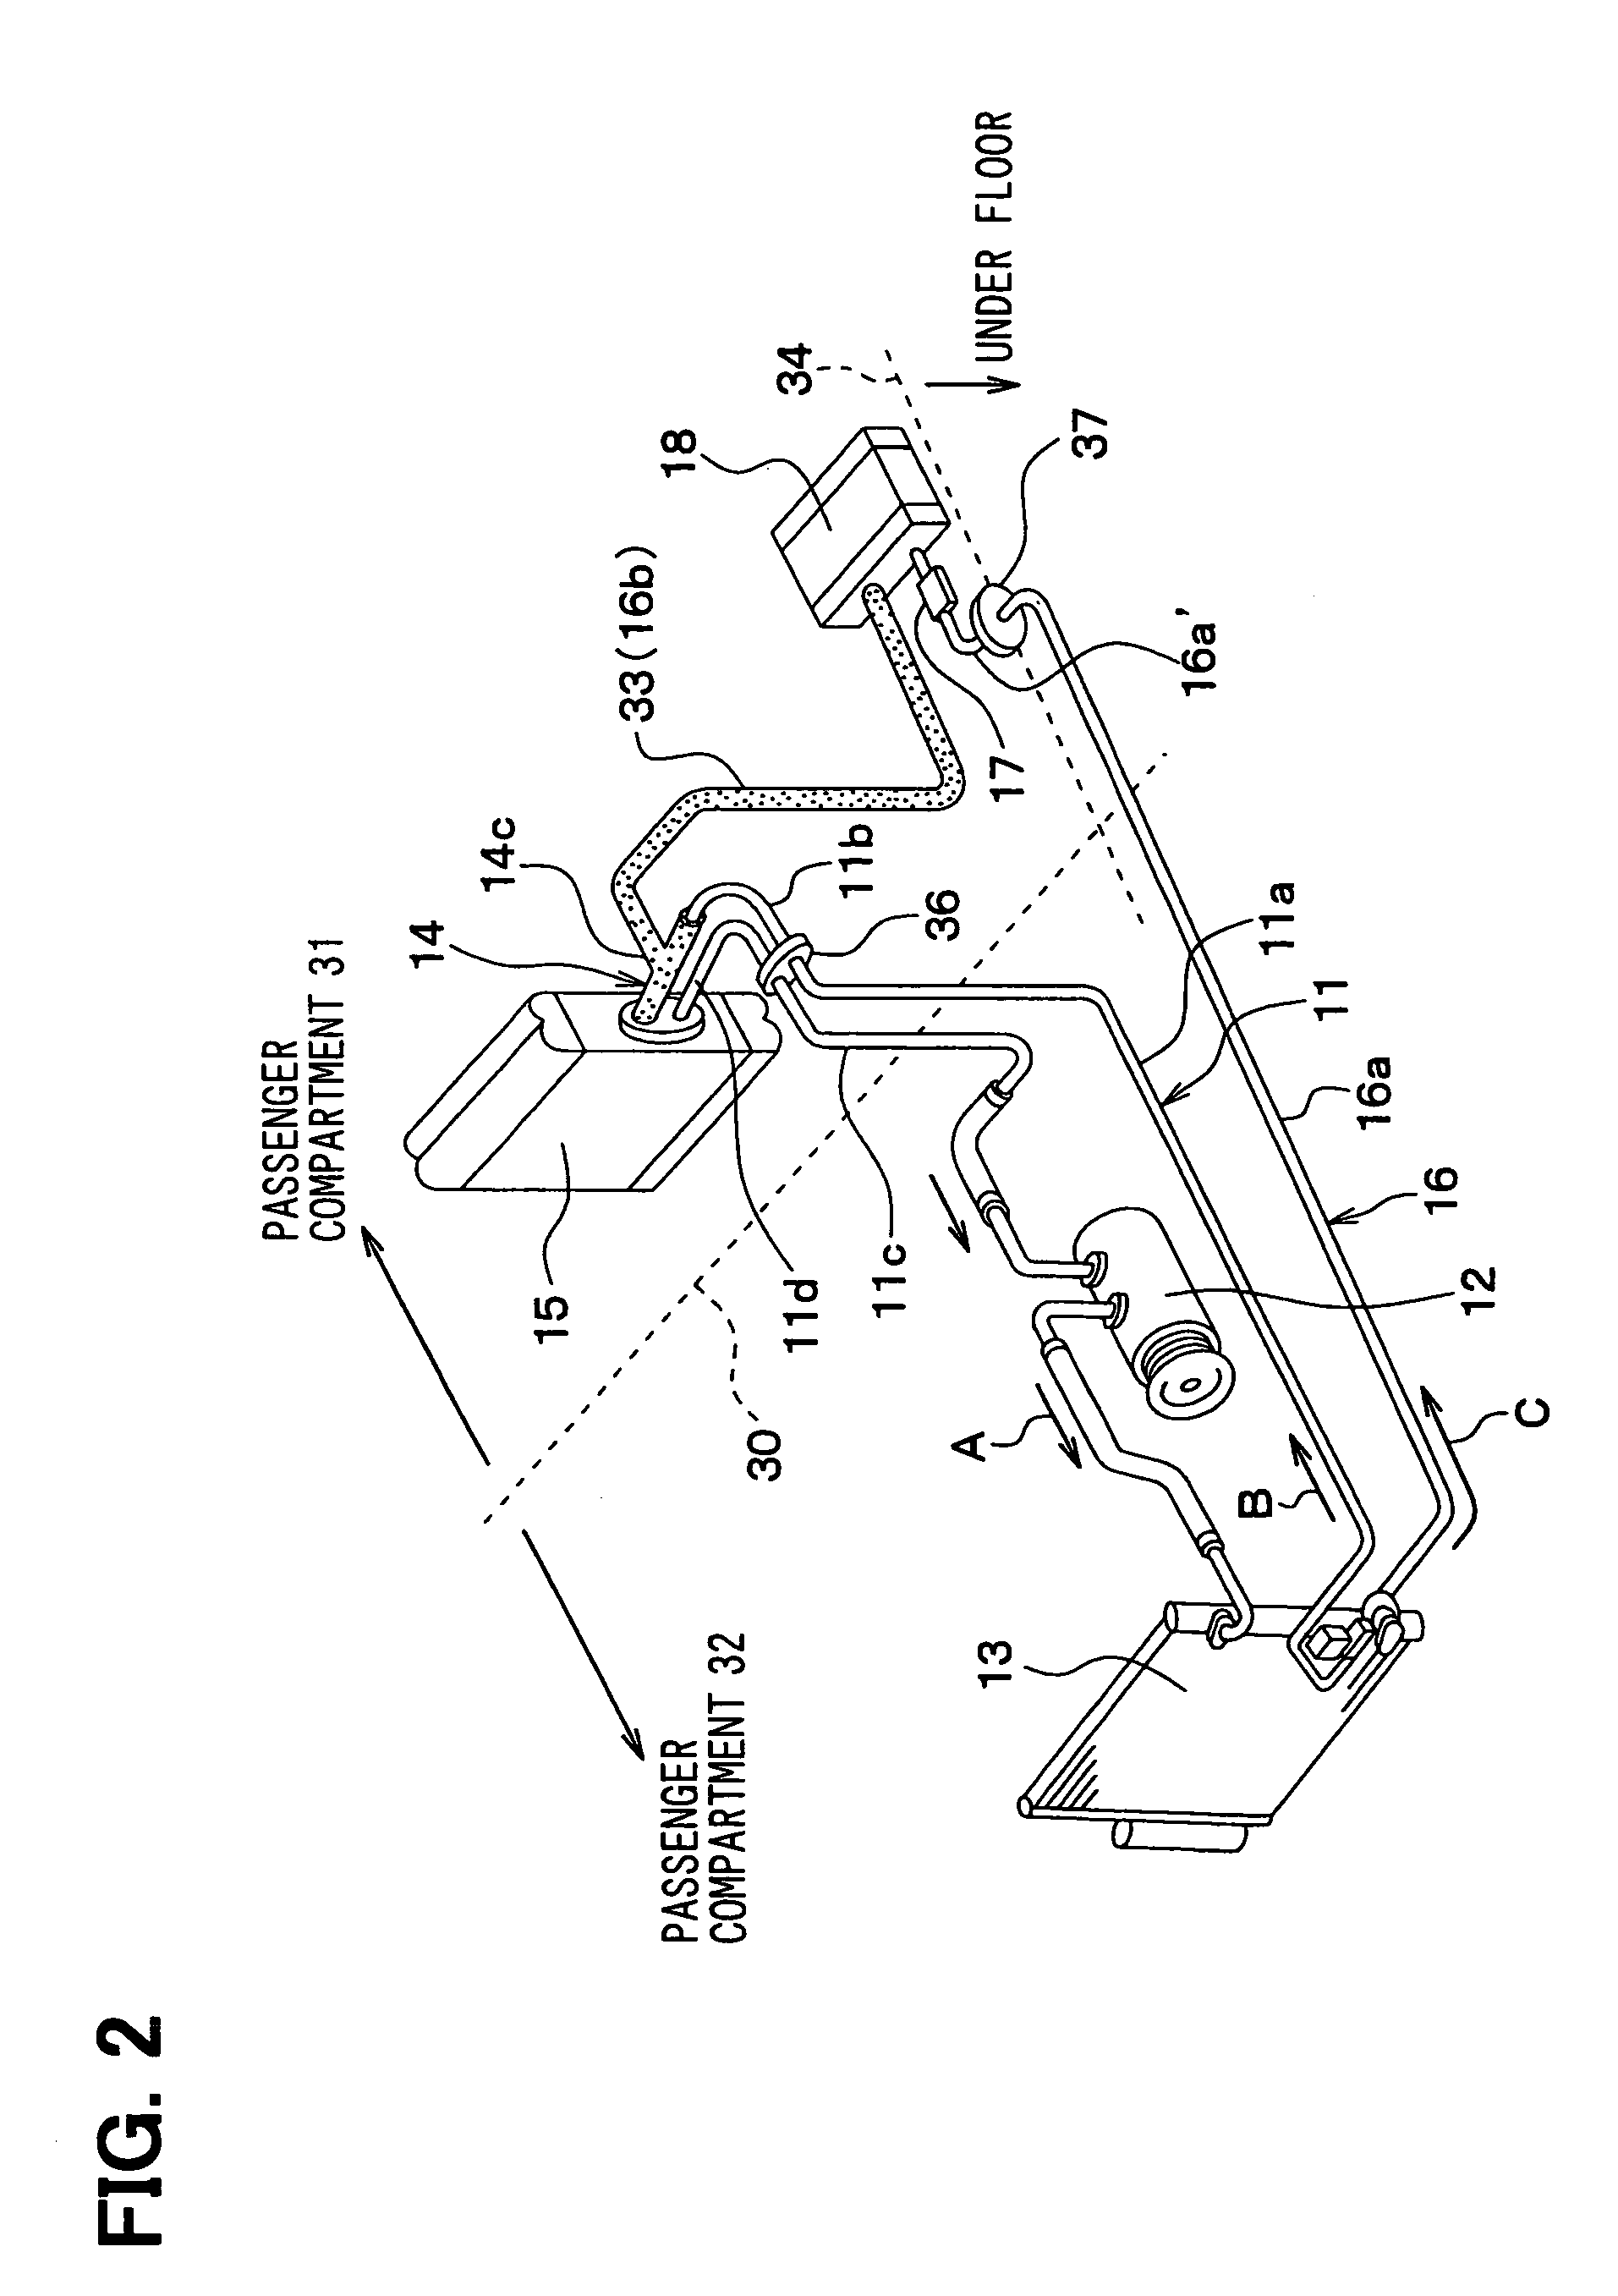 Refrigerant cycle device for vehicle